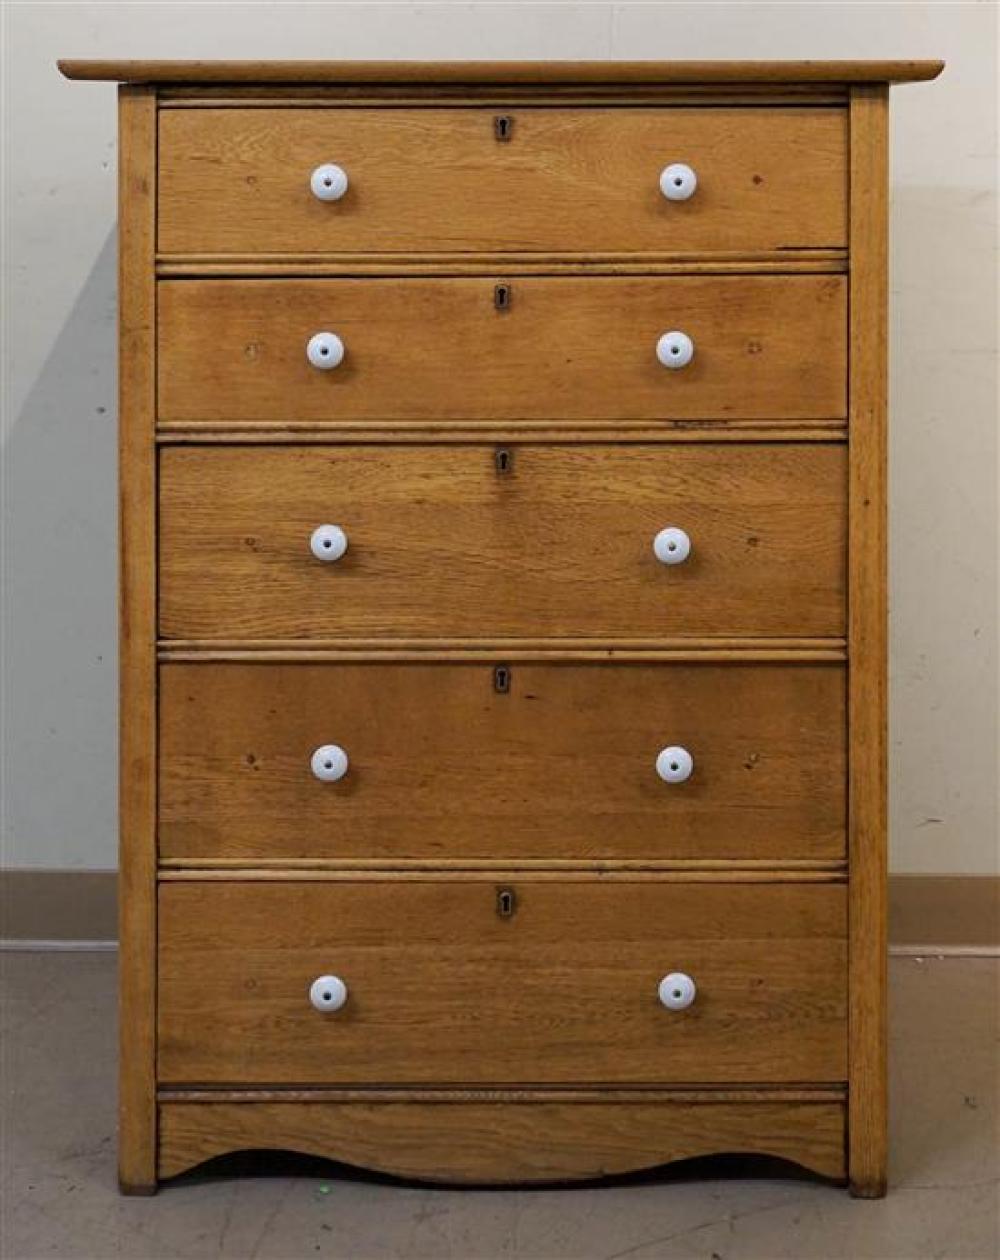 OAK CHEST OF DRAWERSOak Chest of Drawers,